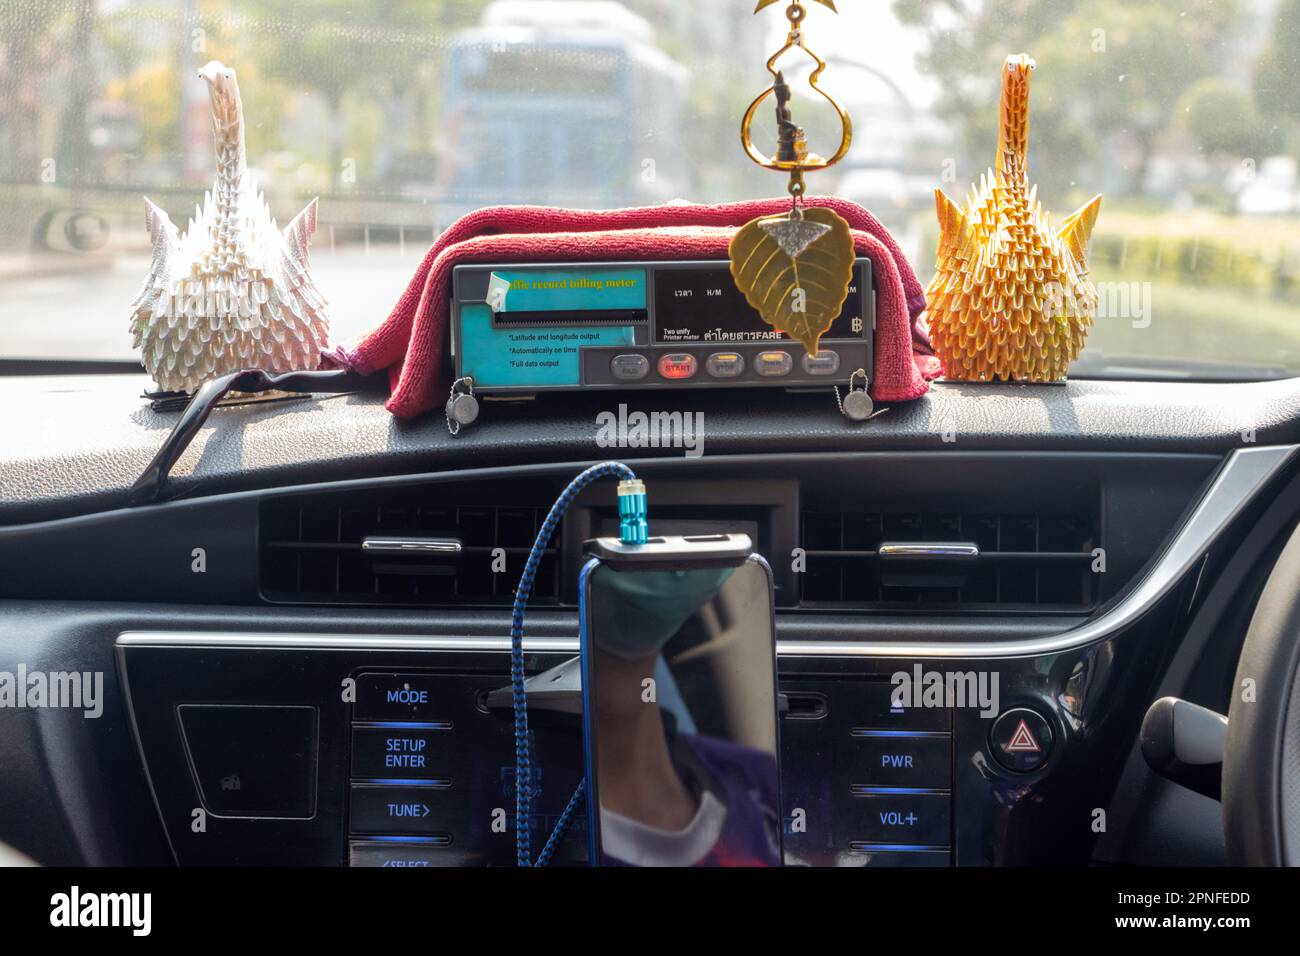 The dashboard of taxi with the digital taxi meters while moving car on a city street, Bangkok, Thailand Stock Photo